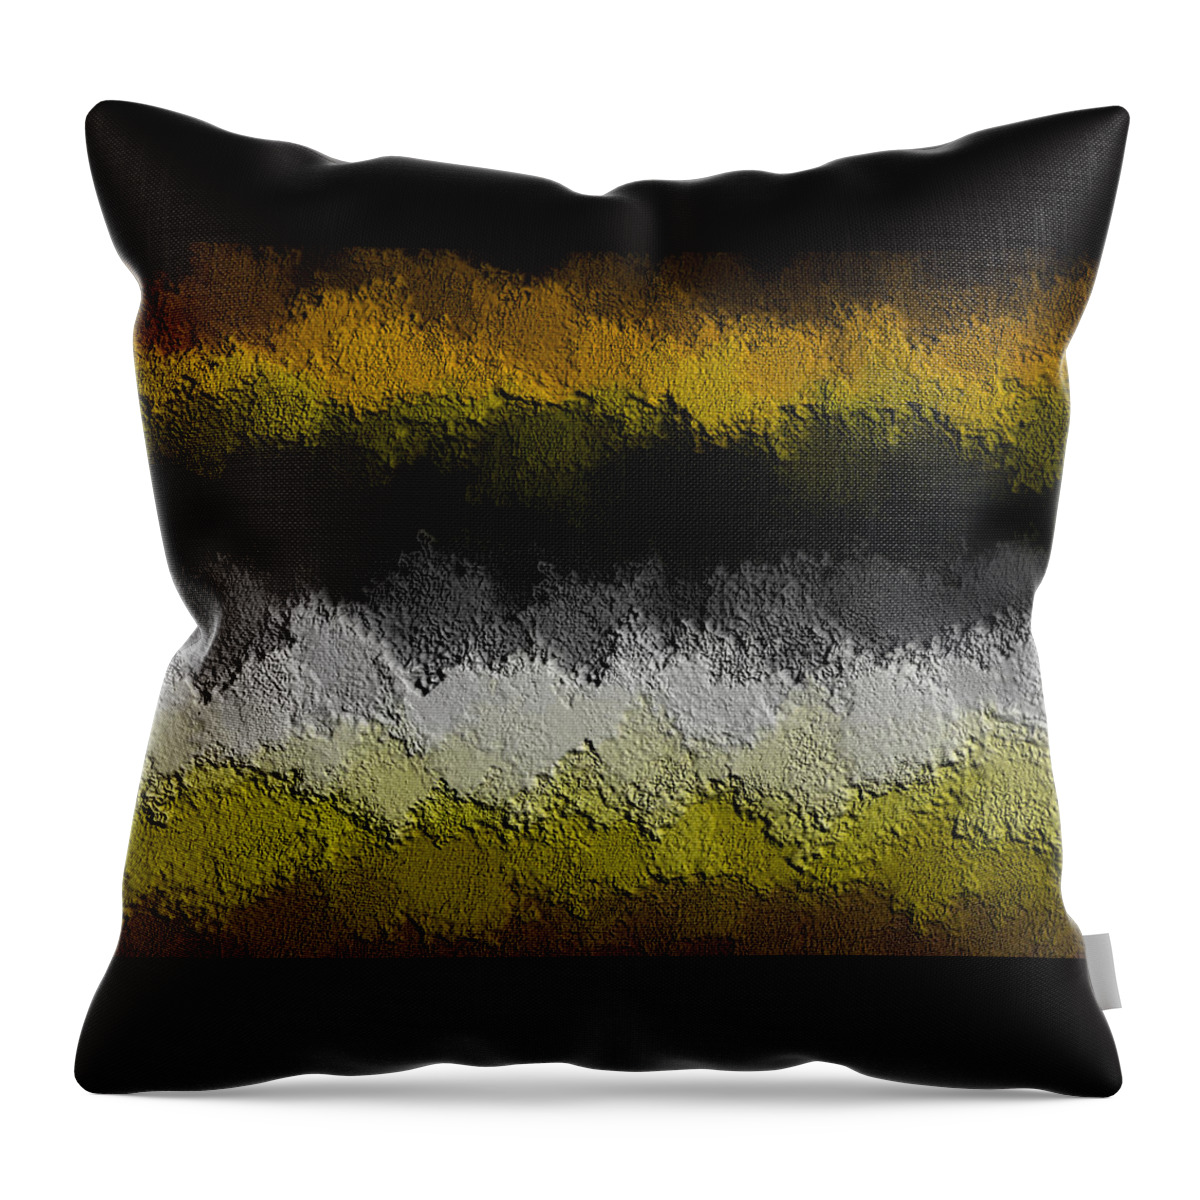 Colorful Throw Pillow featuring the digital art Nidanaax-flat by Jeff Iverson